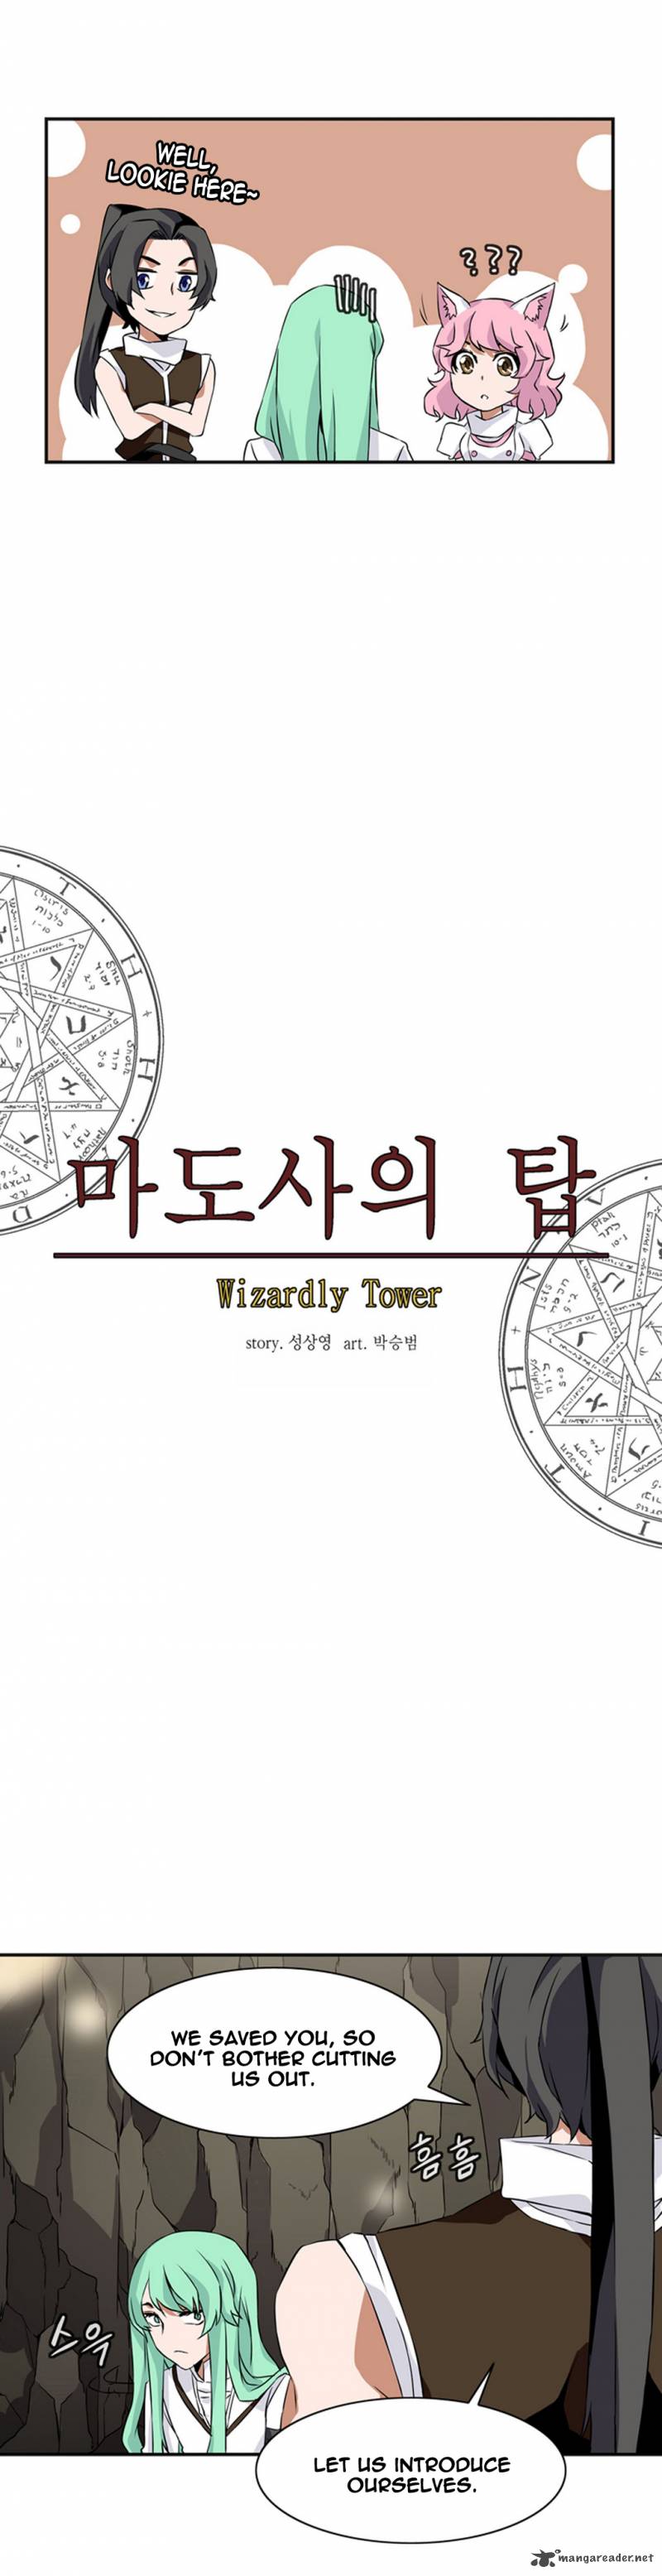 Wizardly Tower 13 9